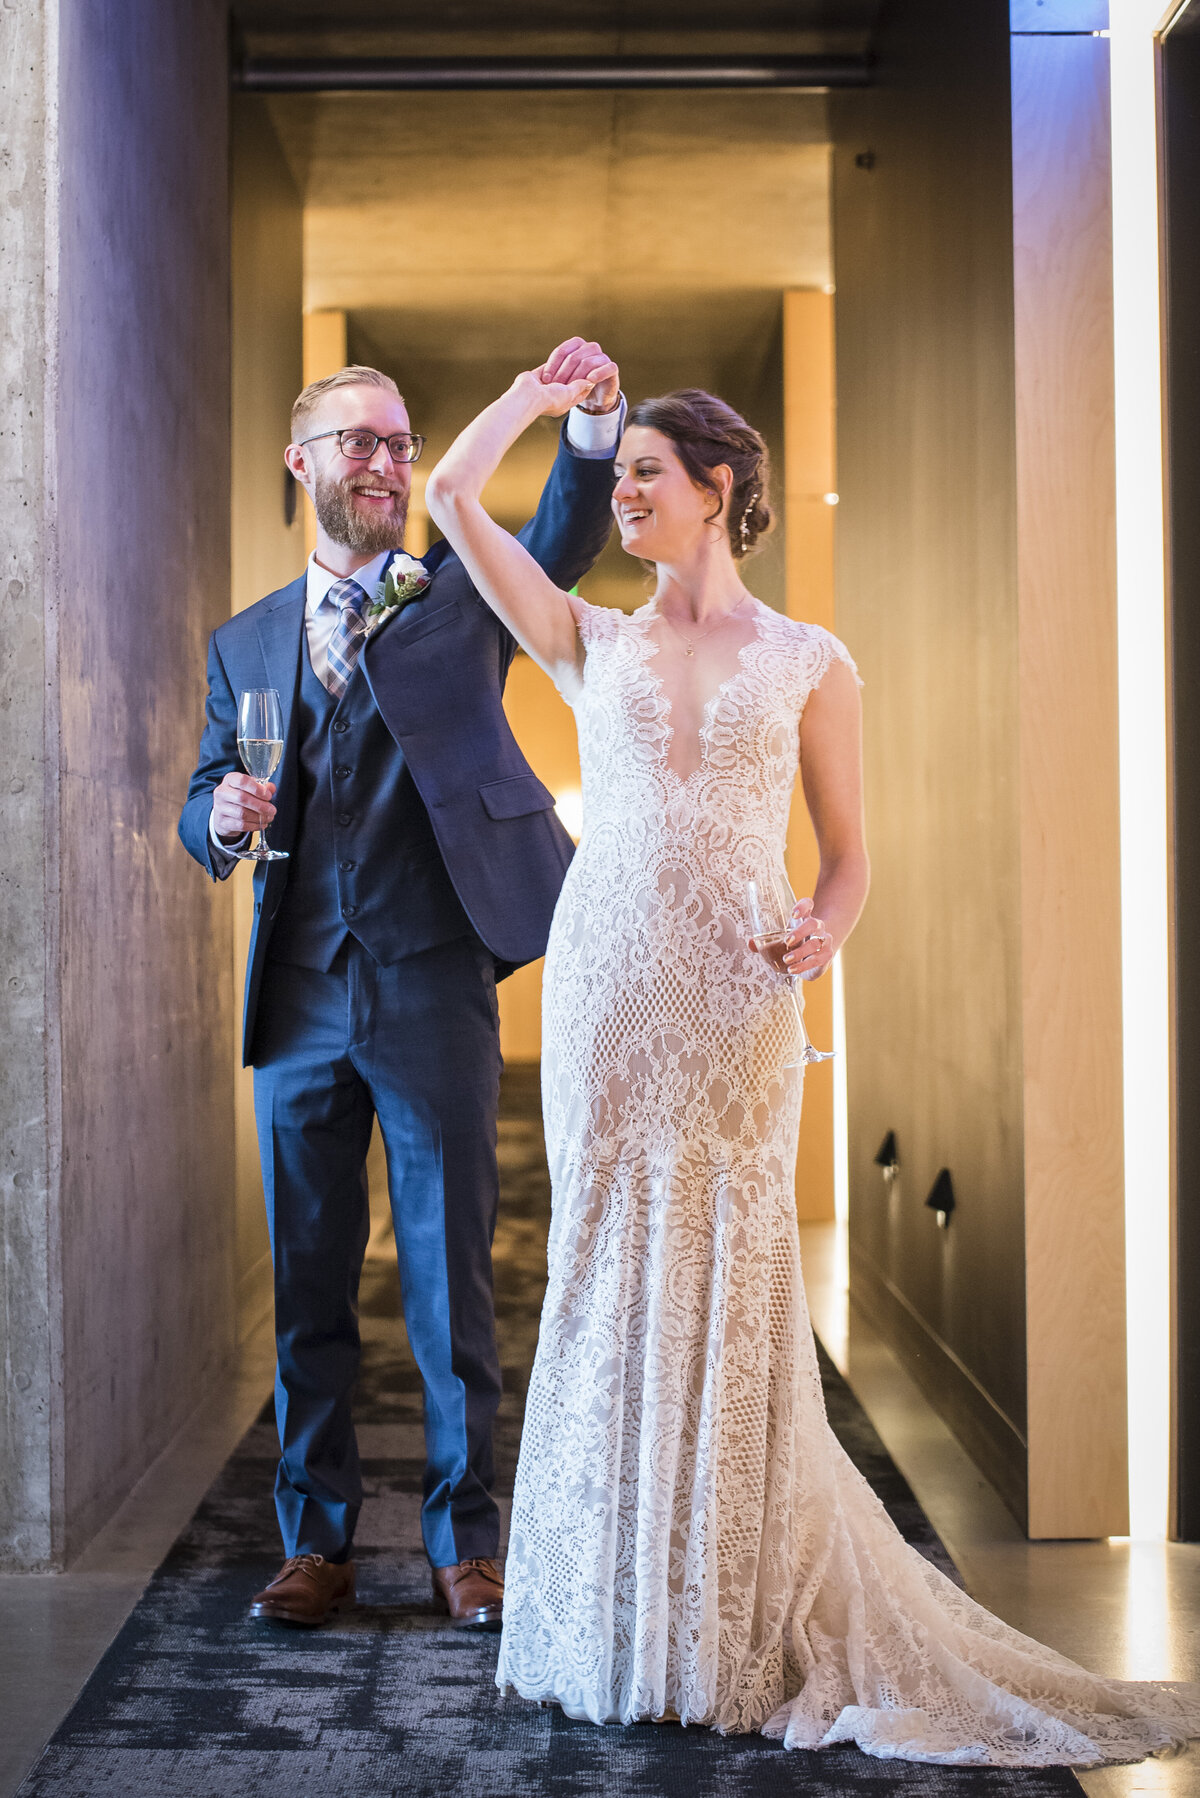 A groom twirls his bride as they hold a flute of champagne in the other hand.